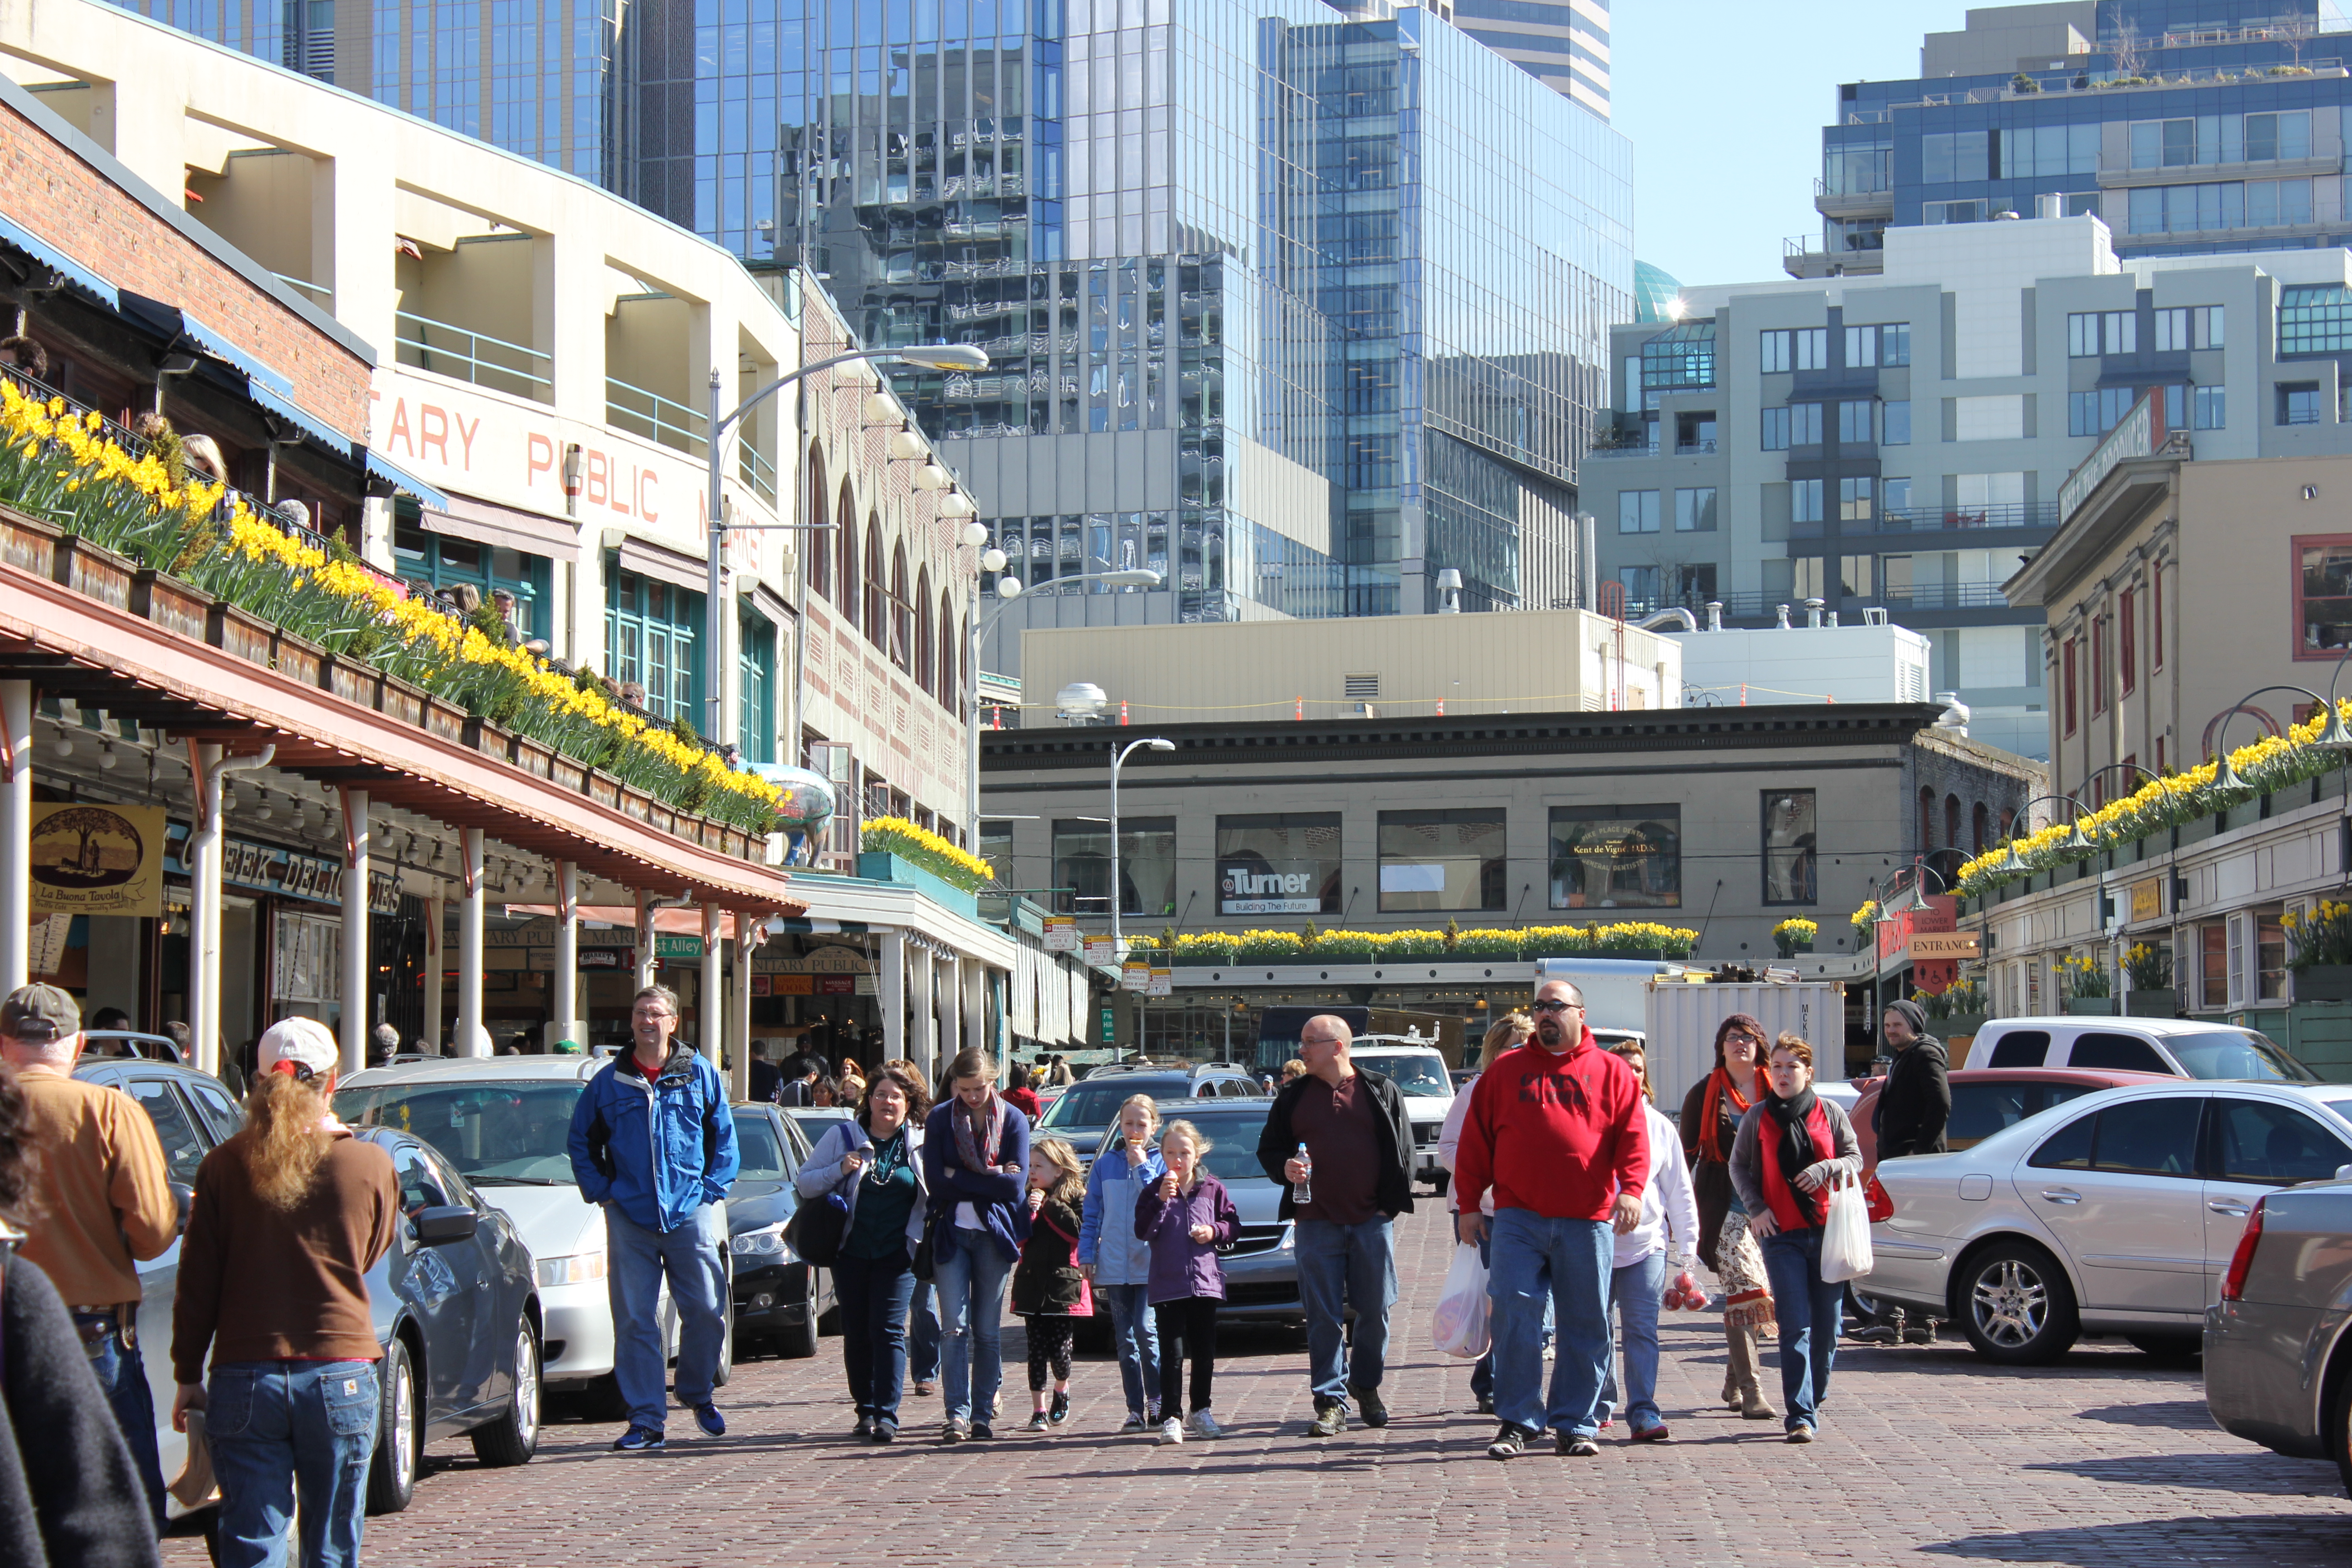 Observing People in Pike Place, Part 2 | The Urbanist